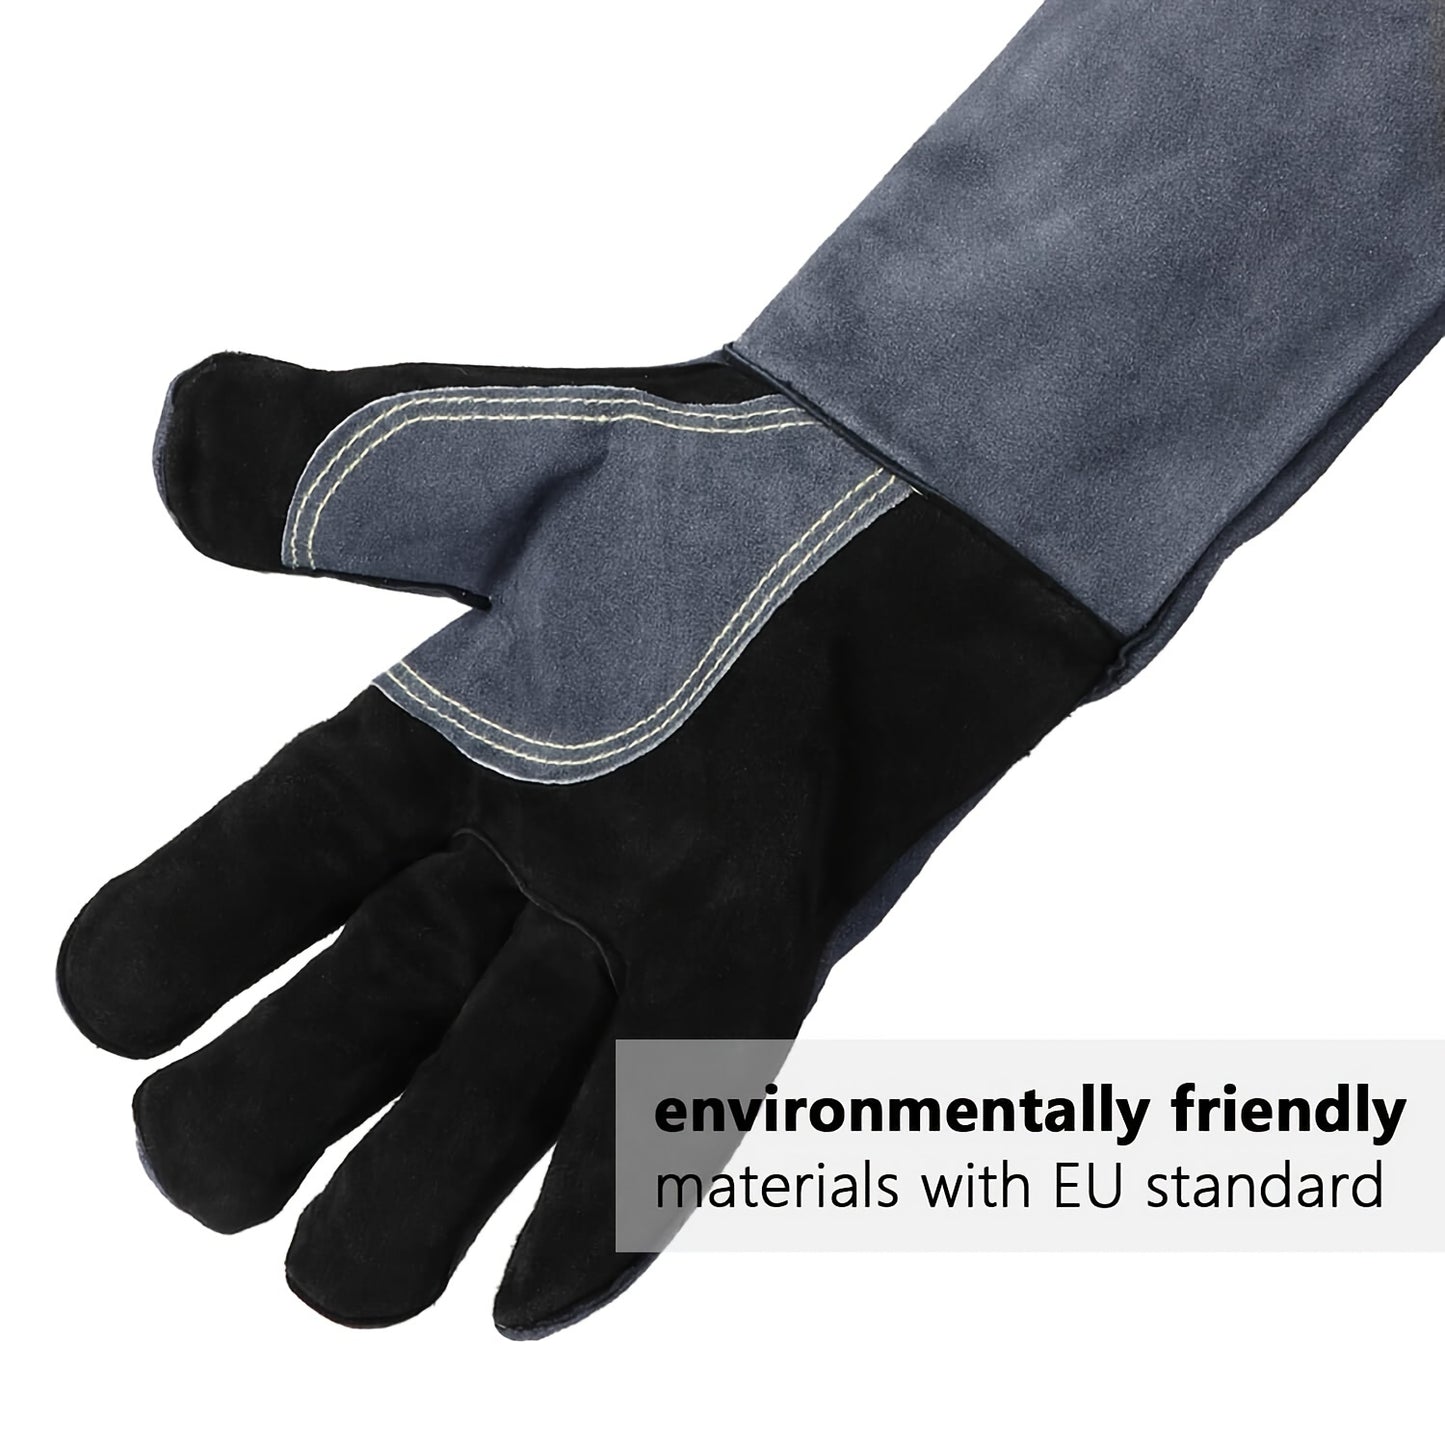 Premium 932°F Forge Welding Gloves - 14 Heat Resistant Leather BBQ Glove with Flame Retardant Long Sleeve & Insulated Lining for Men & Women